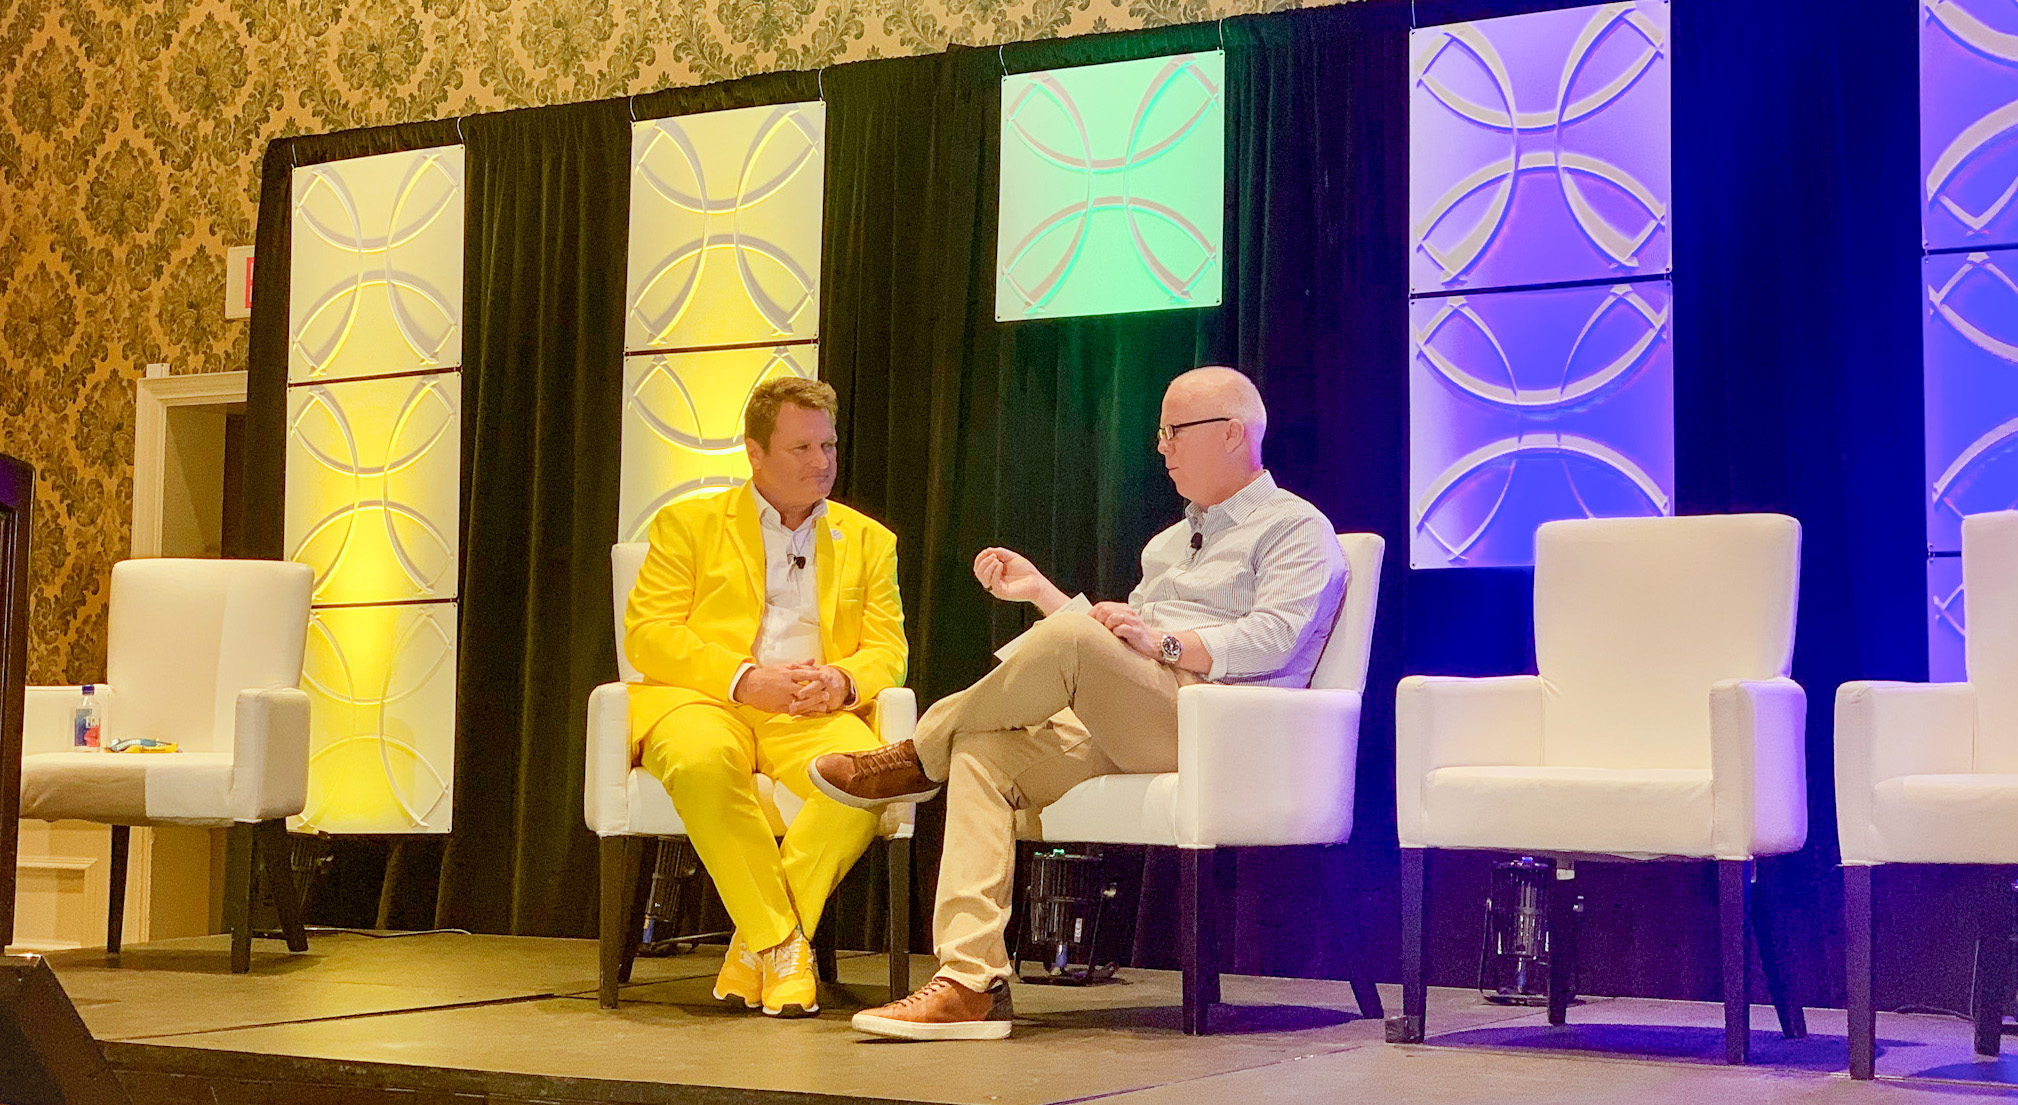 Boris Stockermann and Will Townsend on stage. Boris wears a yellow suit. Interview at LoRaWAN Live Orlando